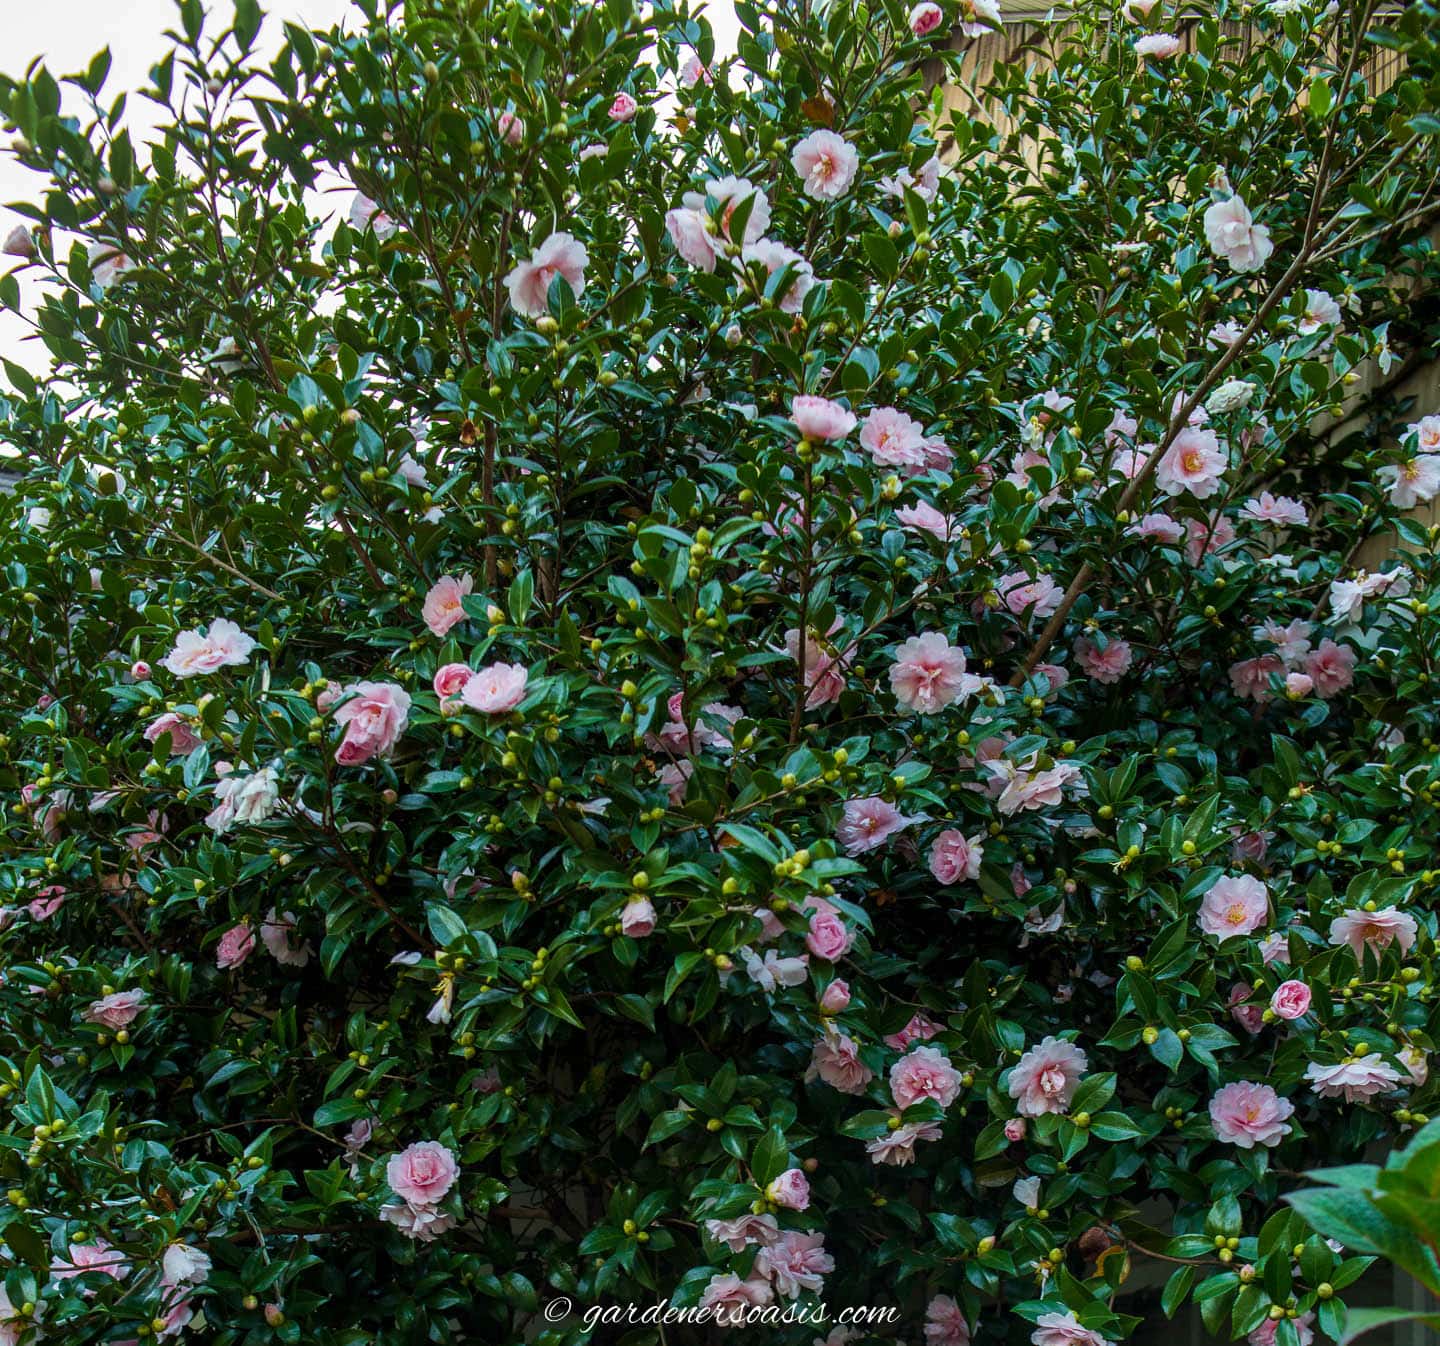 J.W. Davis Camellia with pink flowers blooming in the winter